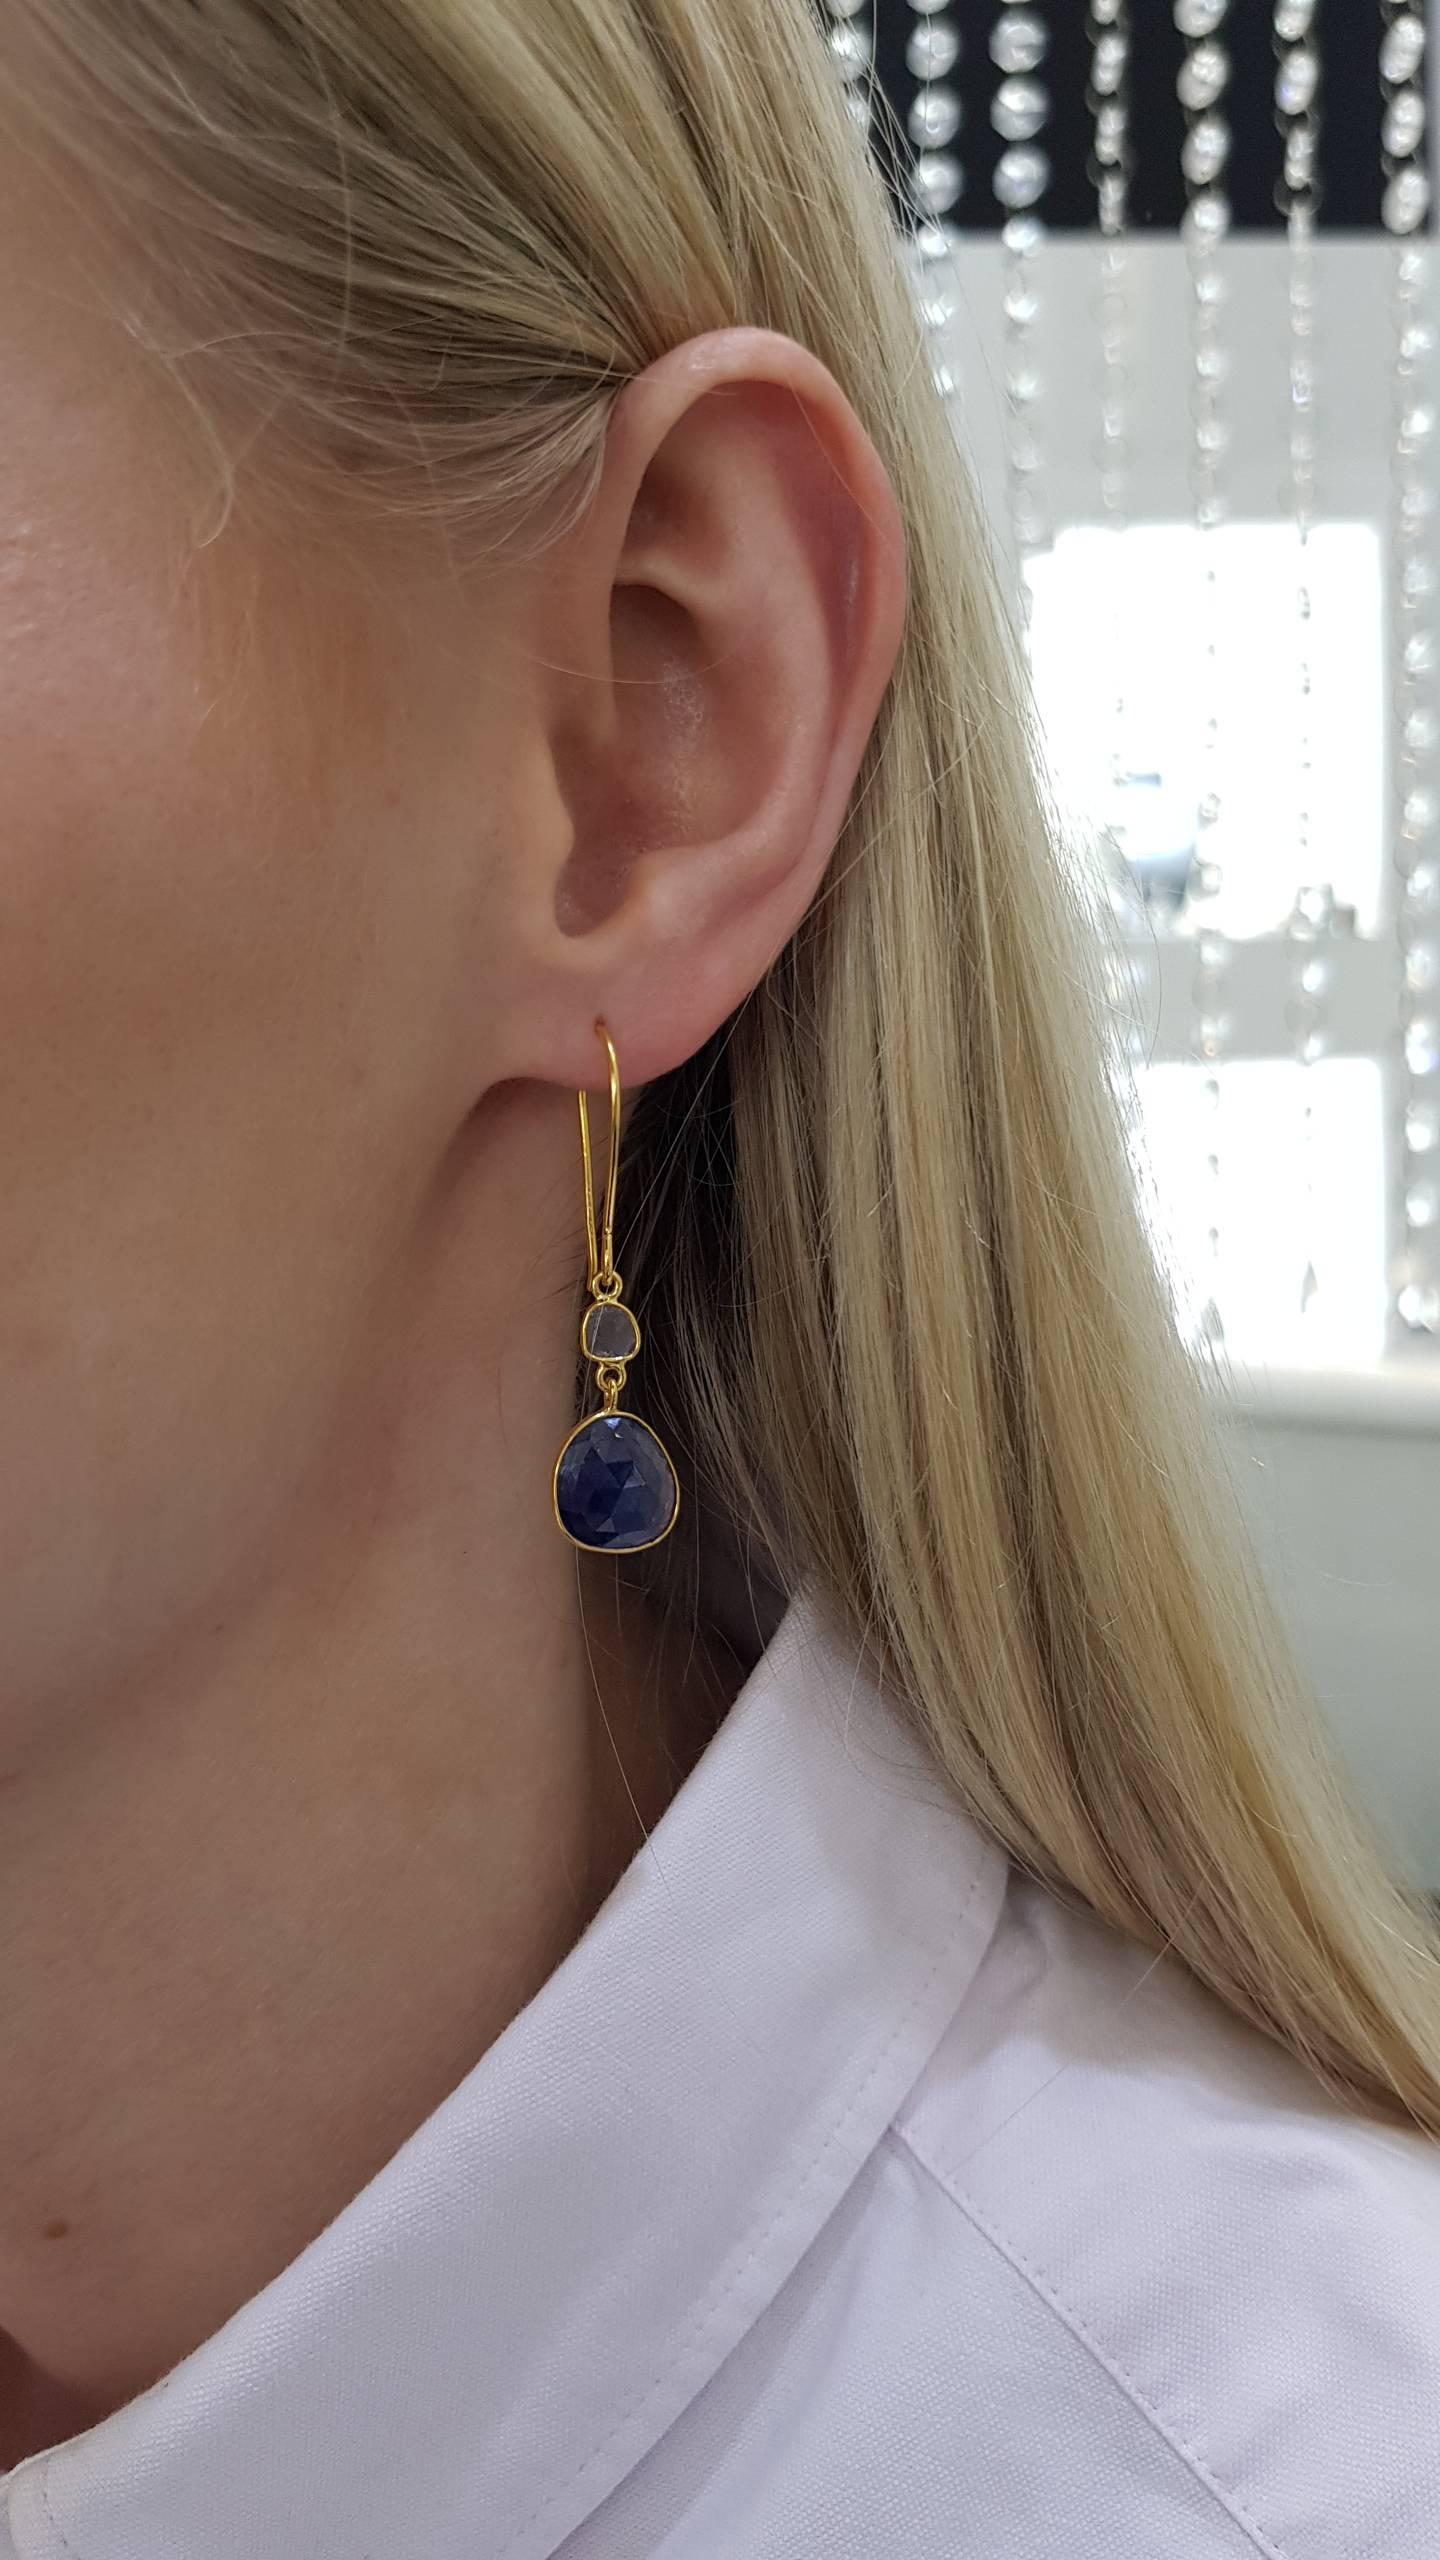 These Gorgeous 7.50 Carat Rose Cut Blue Sapphire Earrings from the Artisan Collection feature 0.18 Carat in two Diamond slices set in 18 Karat Yellow Gold. Each piece is hand made with a unique shaped precious stones. These elegant and lightweight